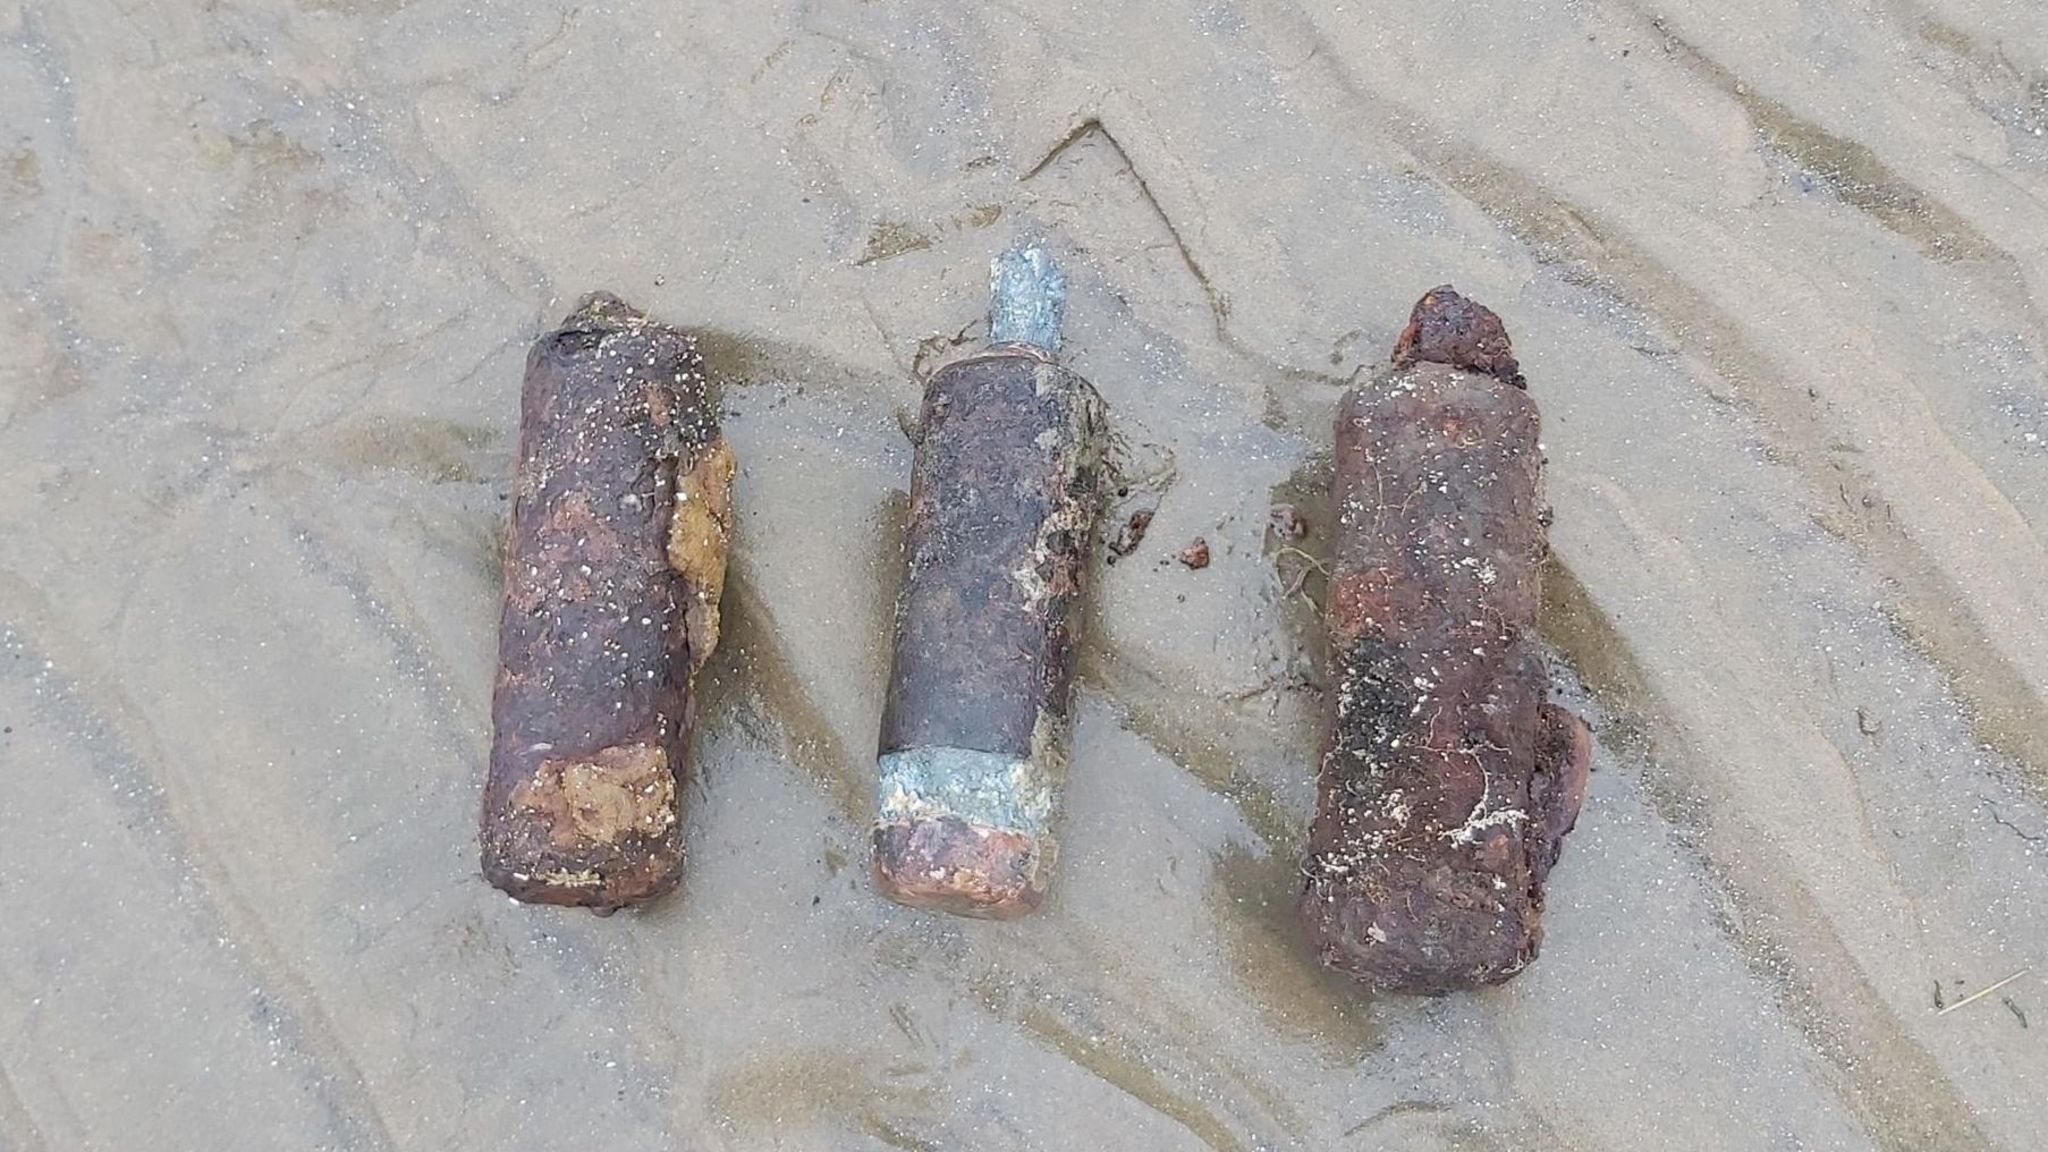 The three unexploded mortar rounds